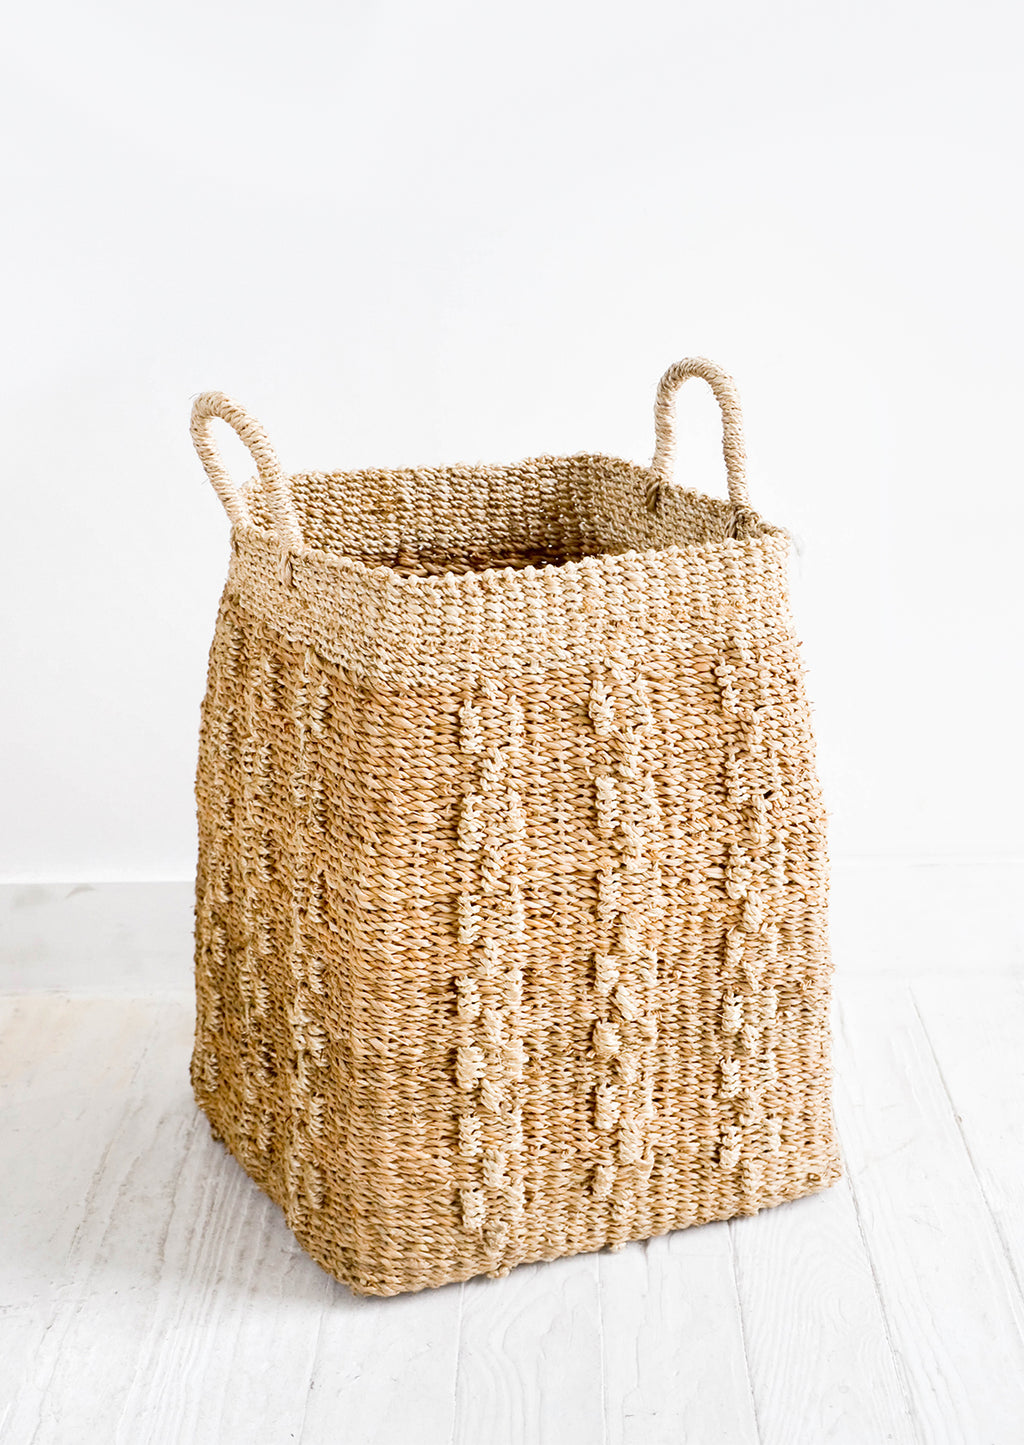 1: Tall, tan colored square storage basket made from banana leaf fiber with decorative woven pattern.